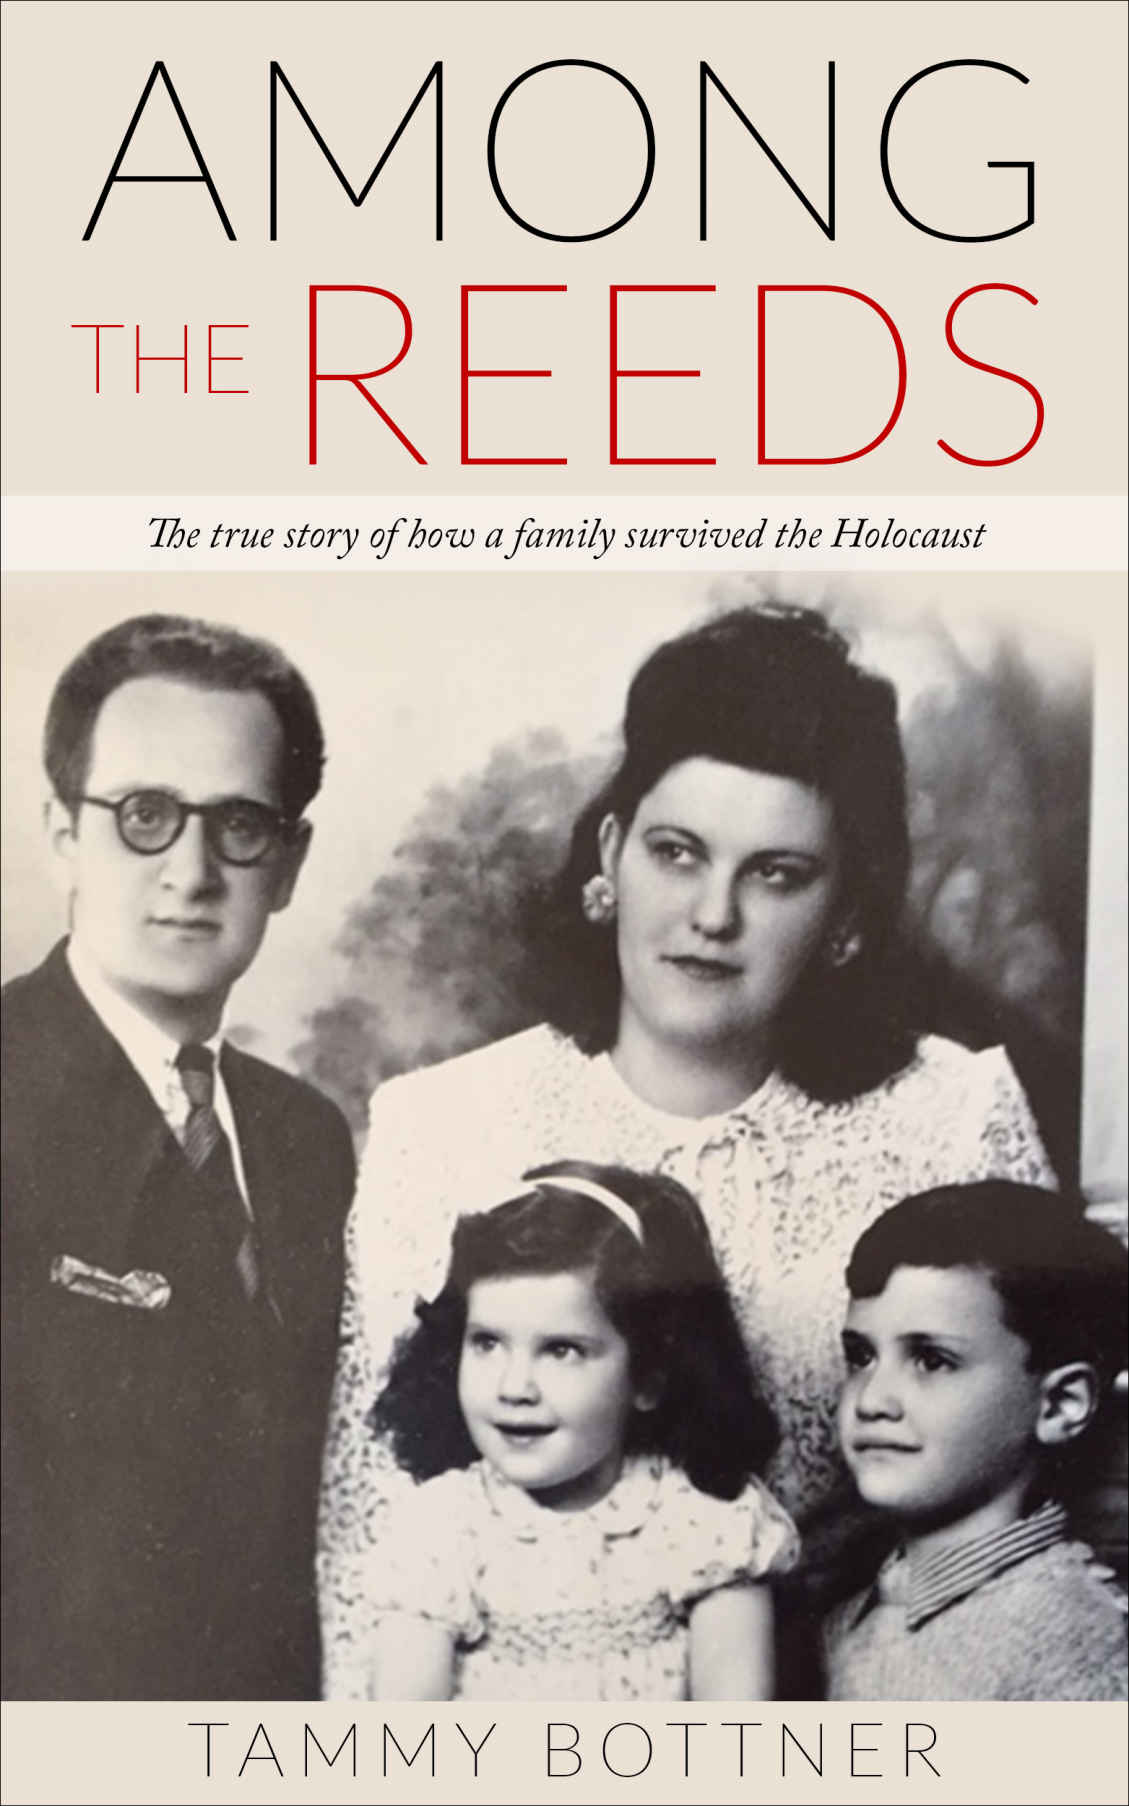 Among the Reeds: The true story of how a family survived the Holocaust (Holocaust Survivor True Stories WWII)